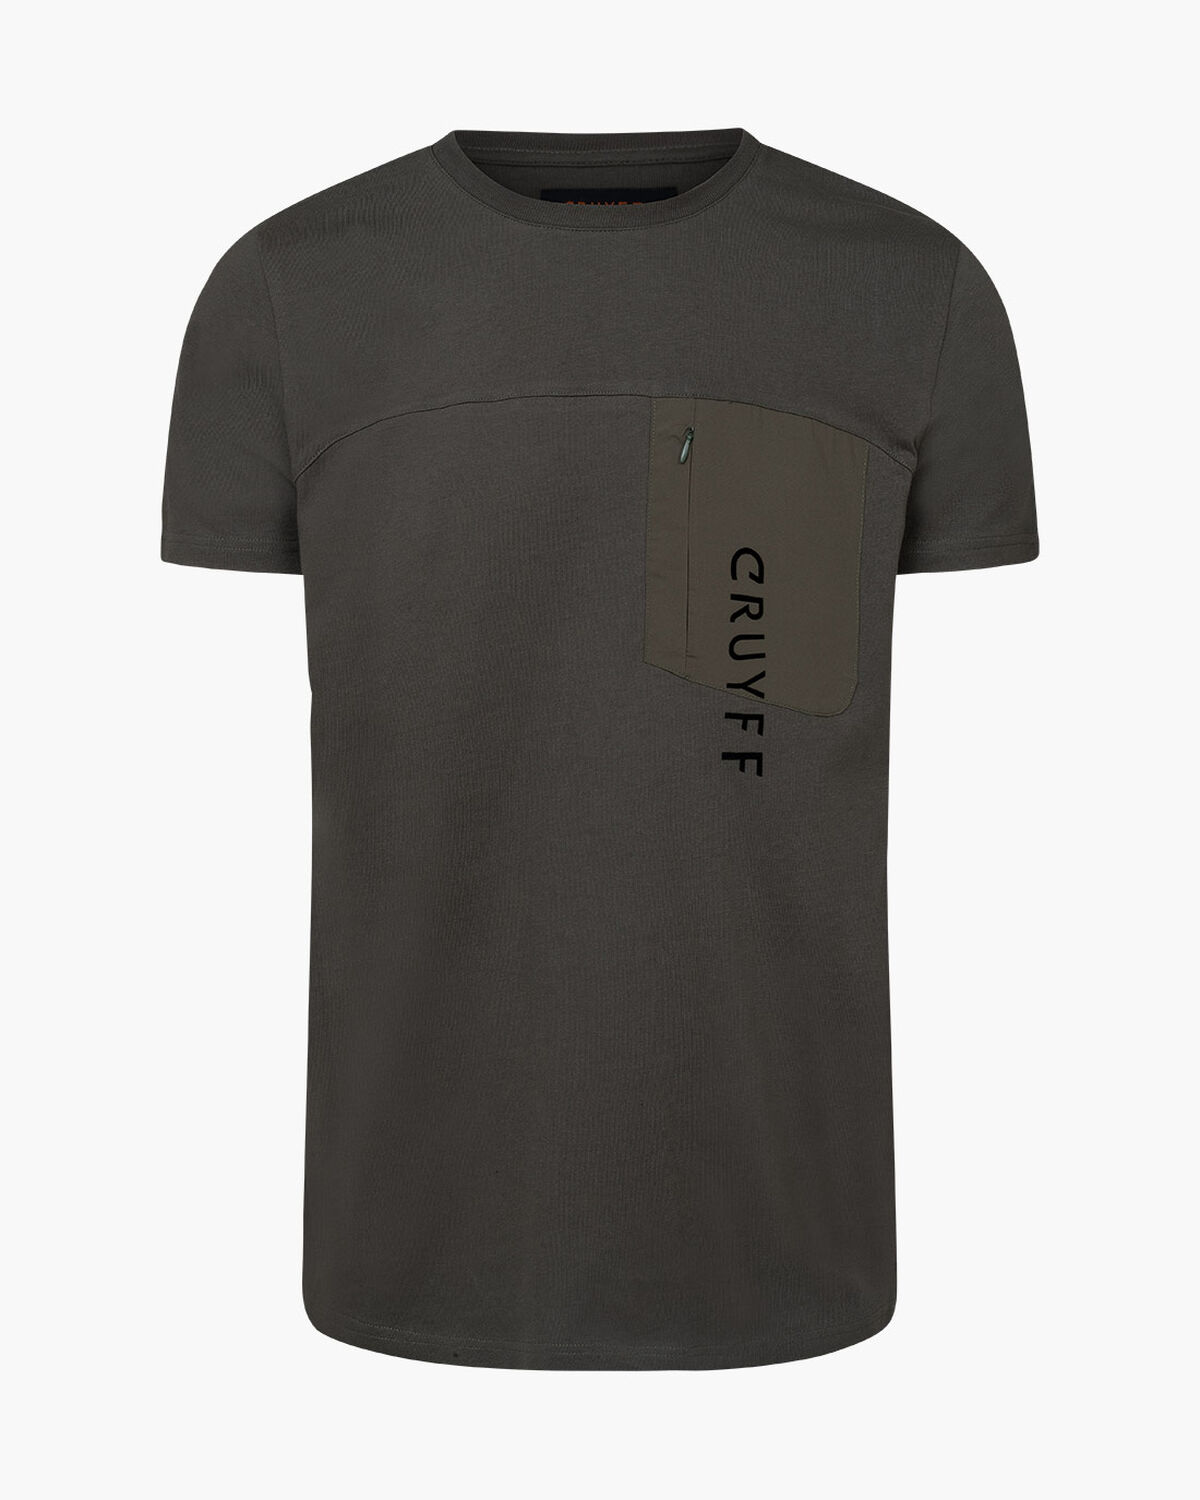 Joey Tee - 100% Cotton, Army green, hi-res